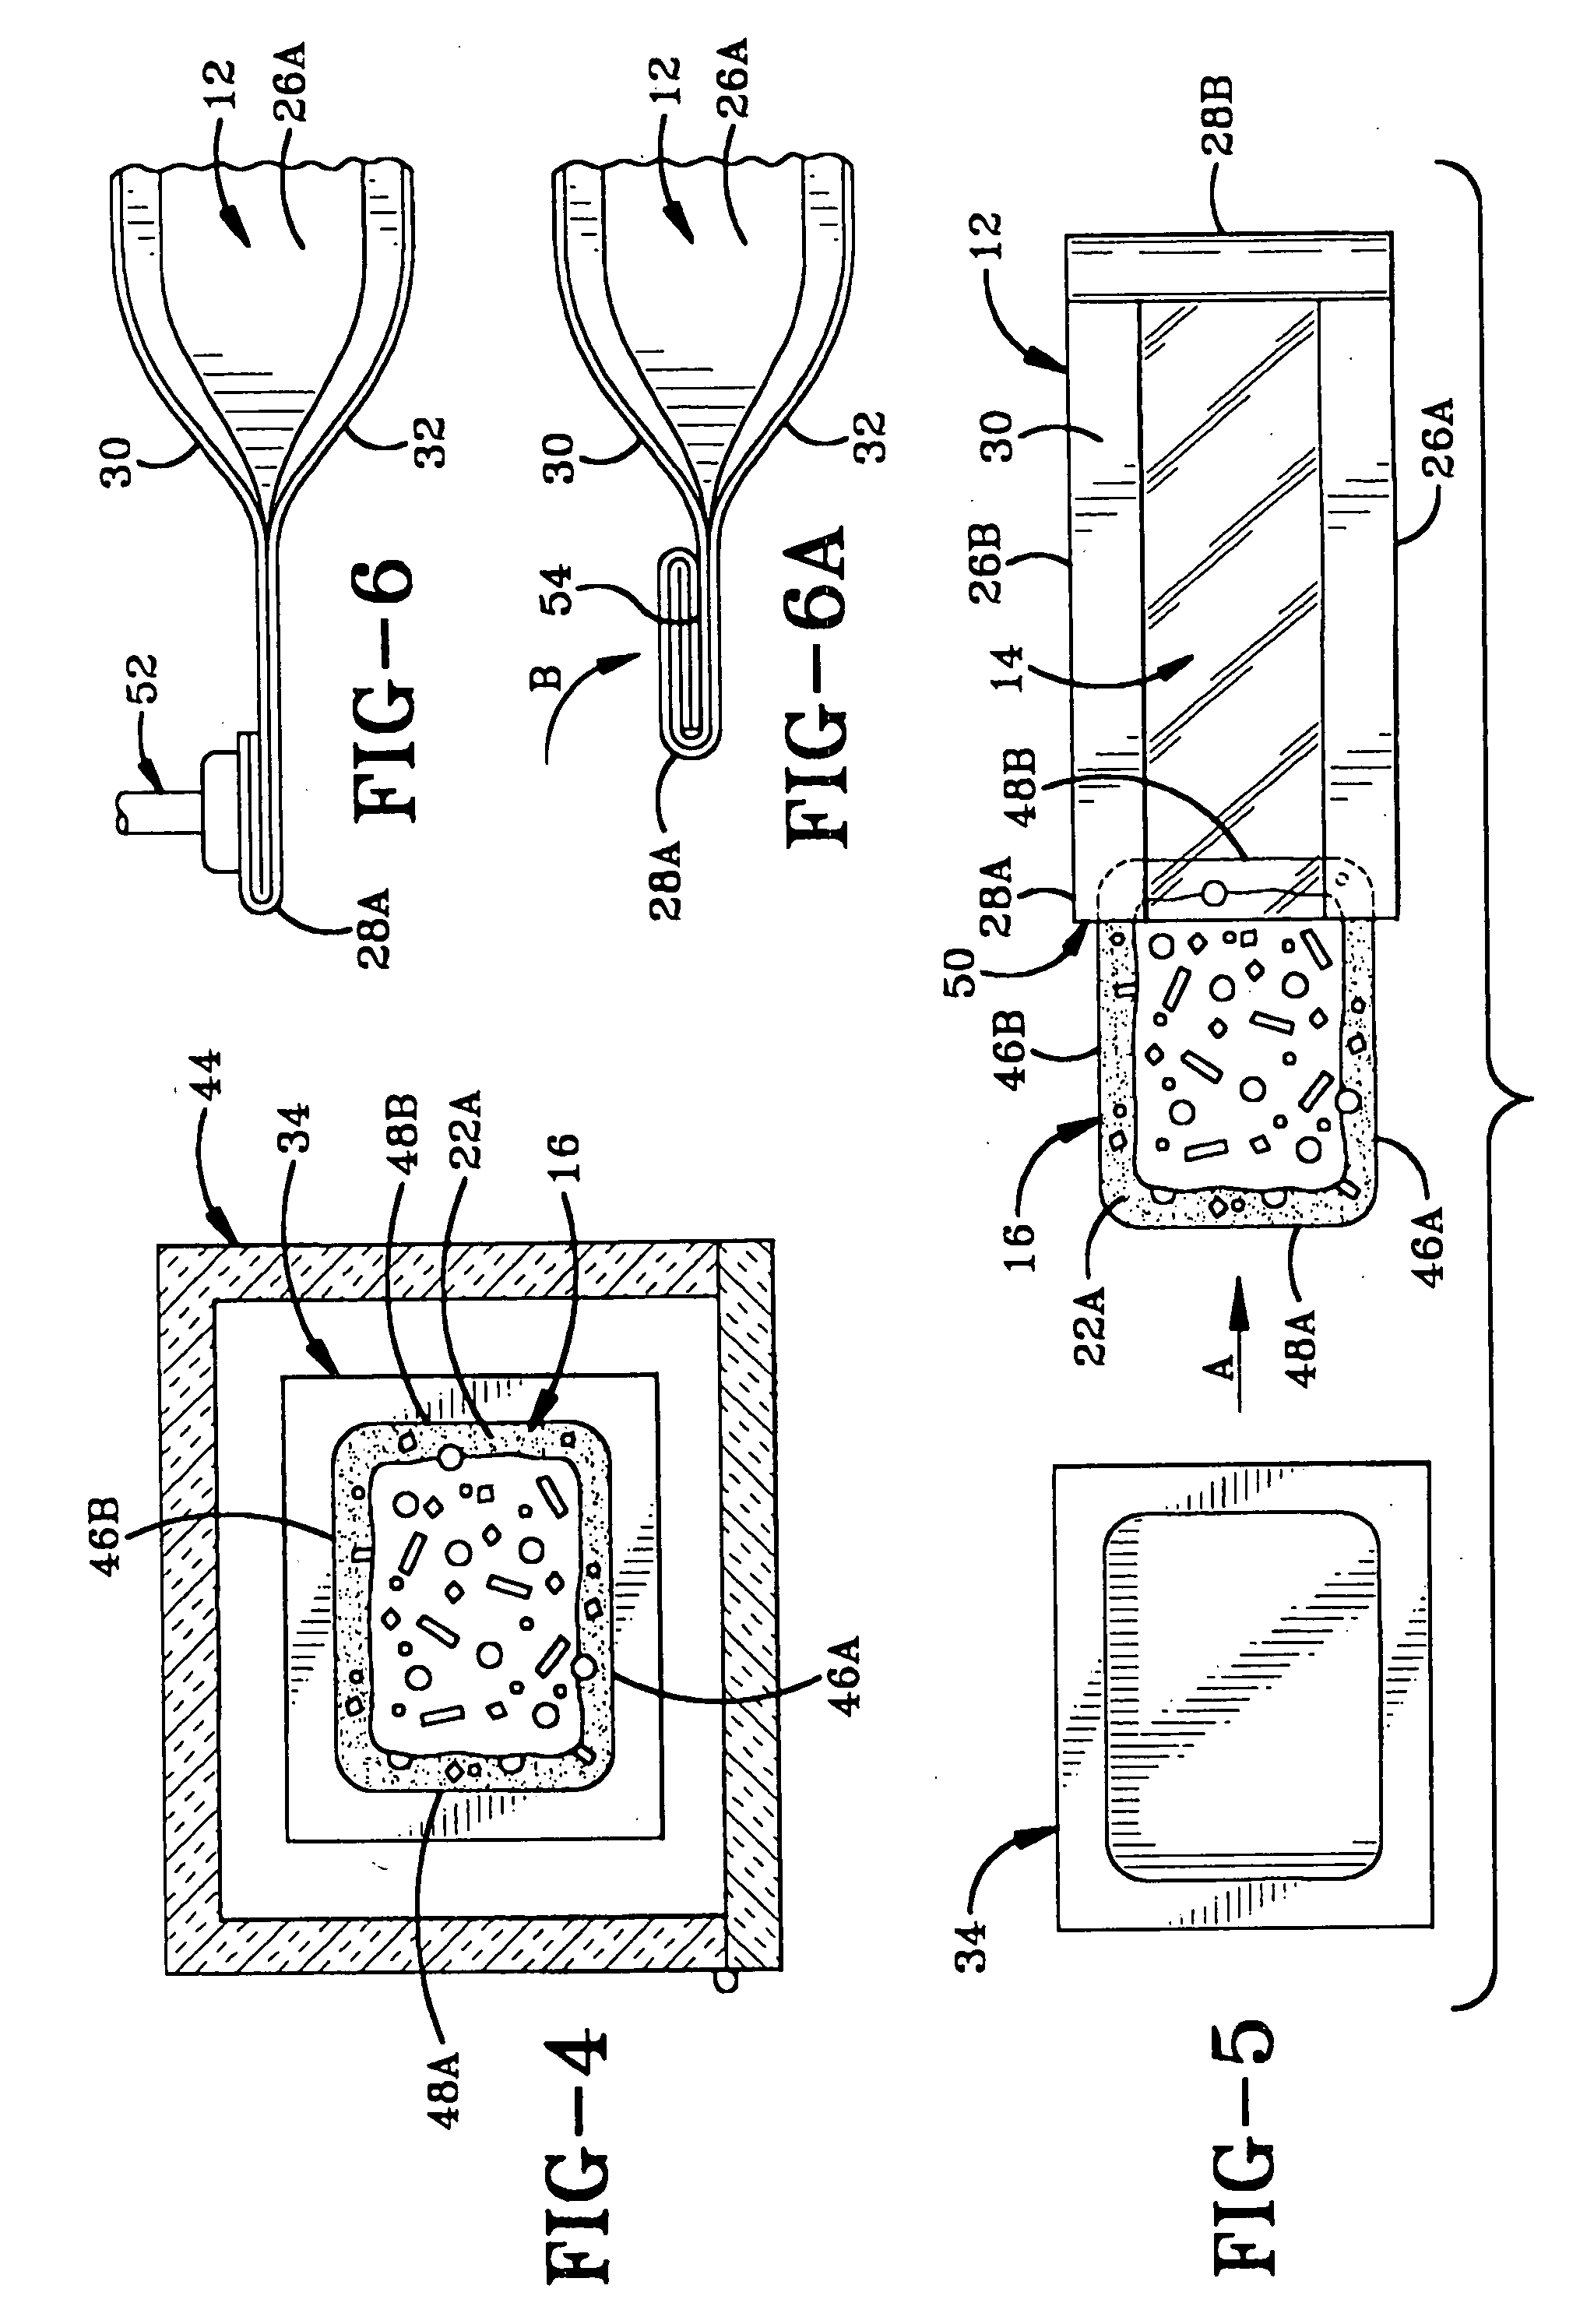 Frozen food package and method of use